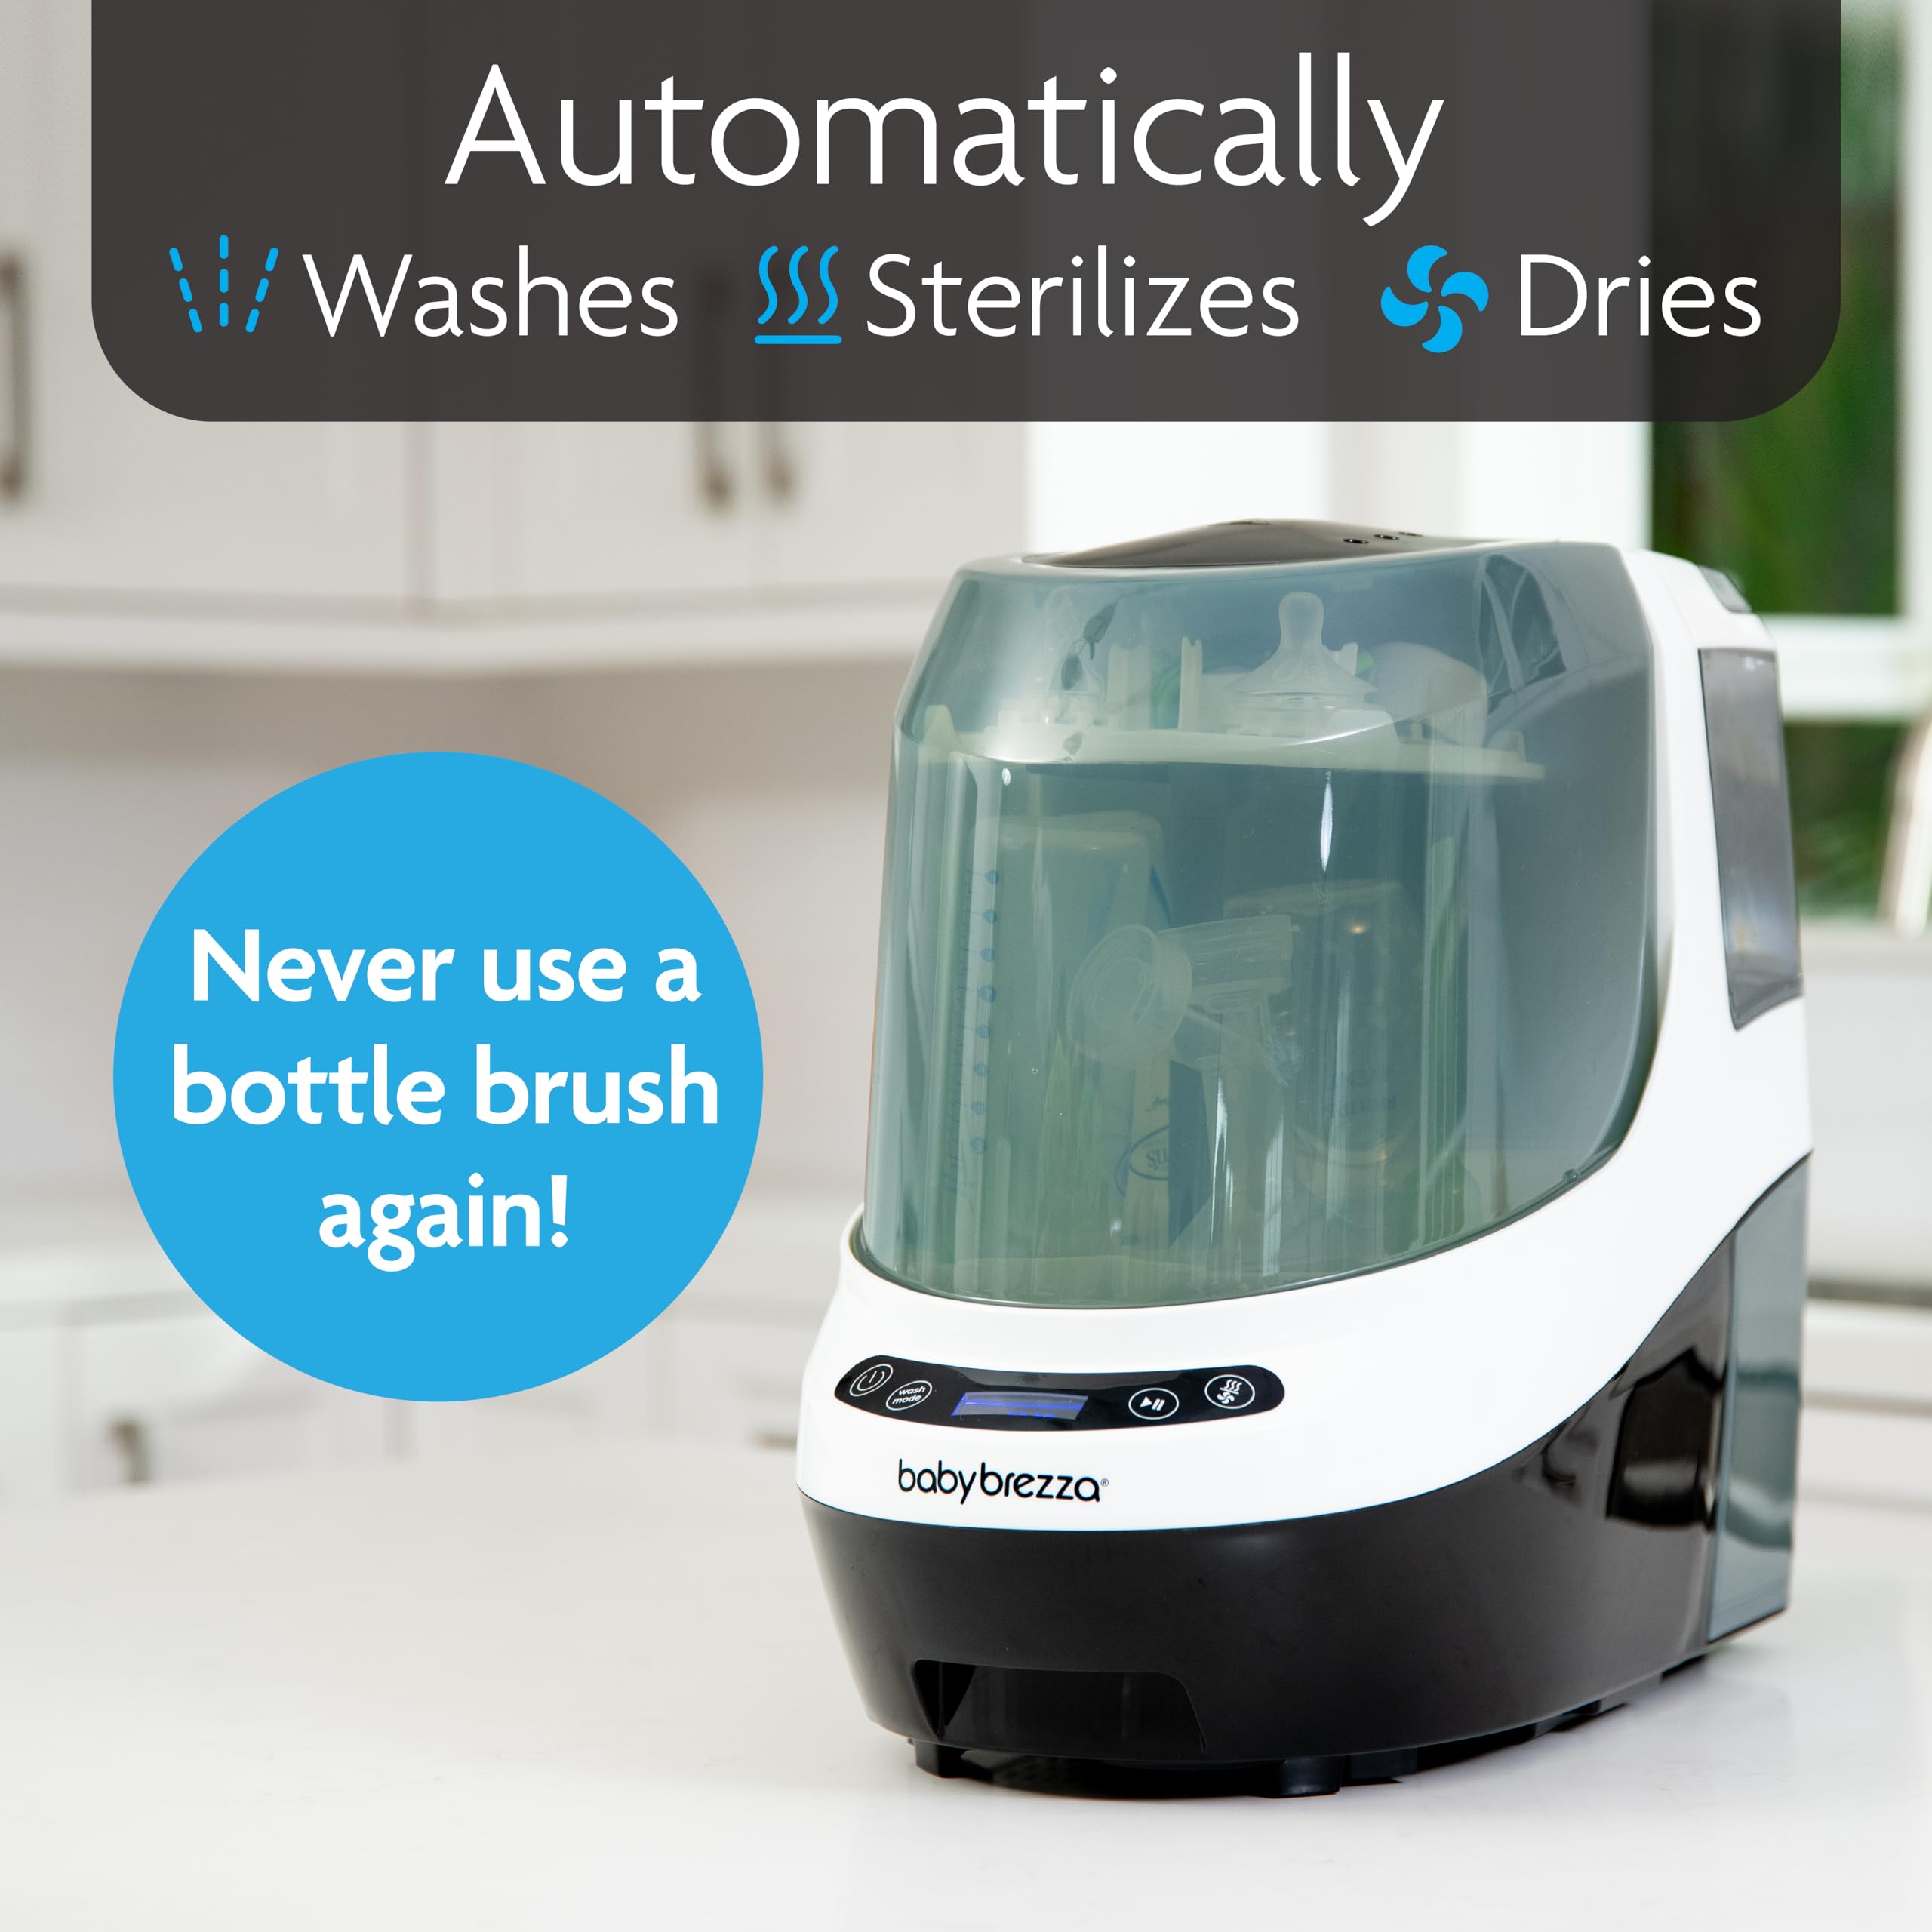 Baby Brezza Bottle Washer Pro - Baby Bottle Washer, Sterilizer + Dryer - All in One Bottle Cleaner Machine Replaces Tedious Bottle Brushes and Hand Washing